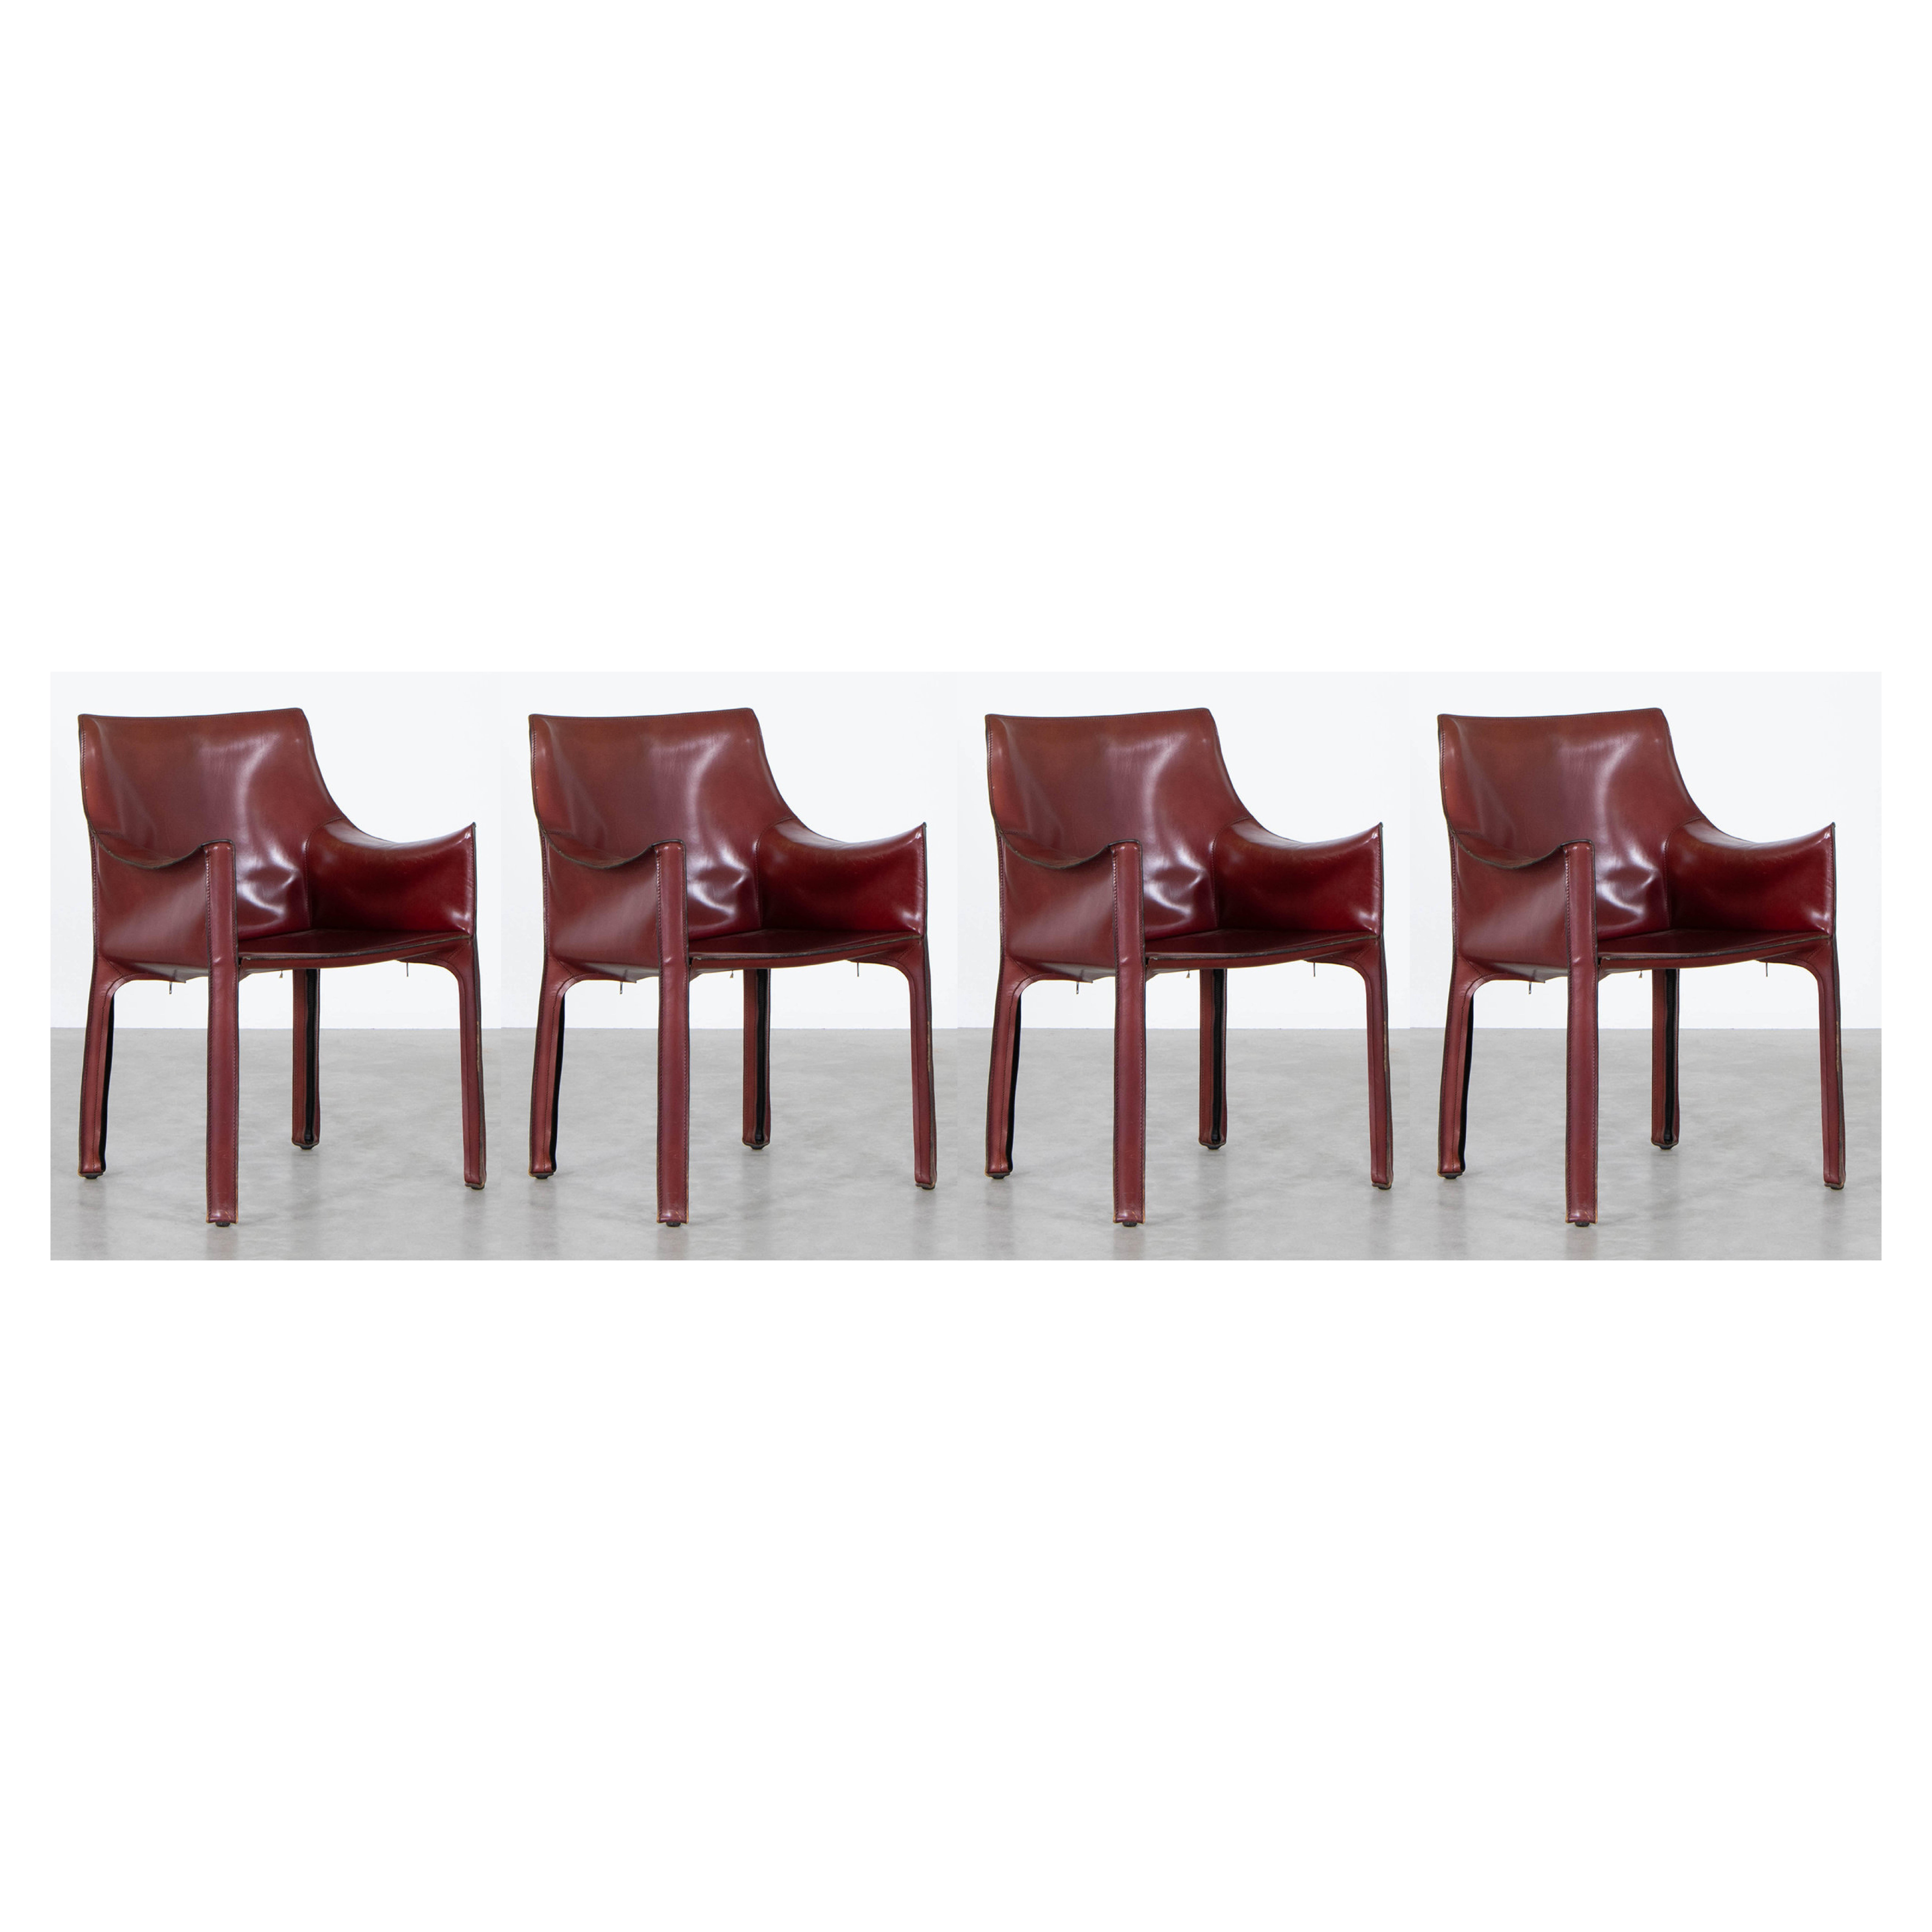 Mario Bellini "CAB 413" Chairs for Cassina in Bordeaux, 1977, Set of 4